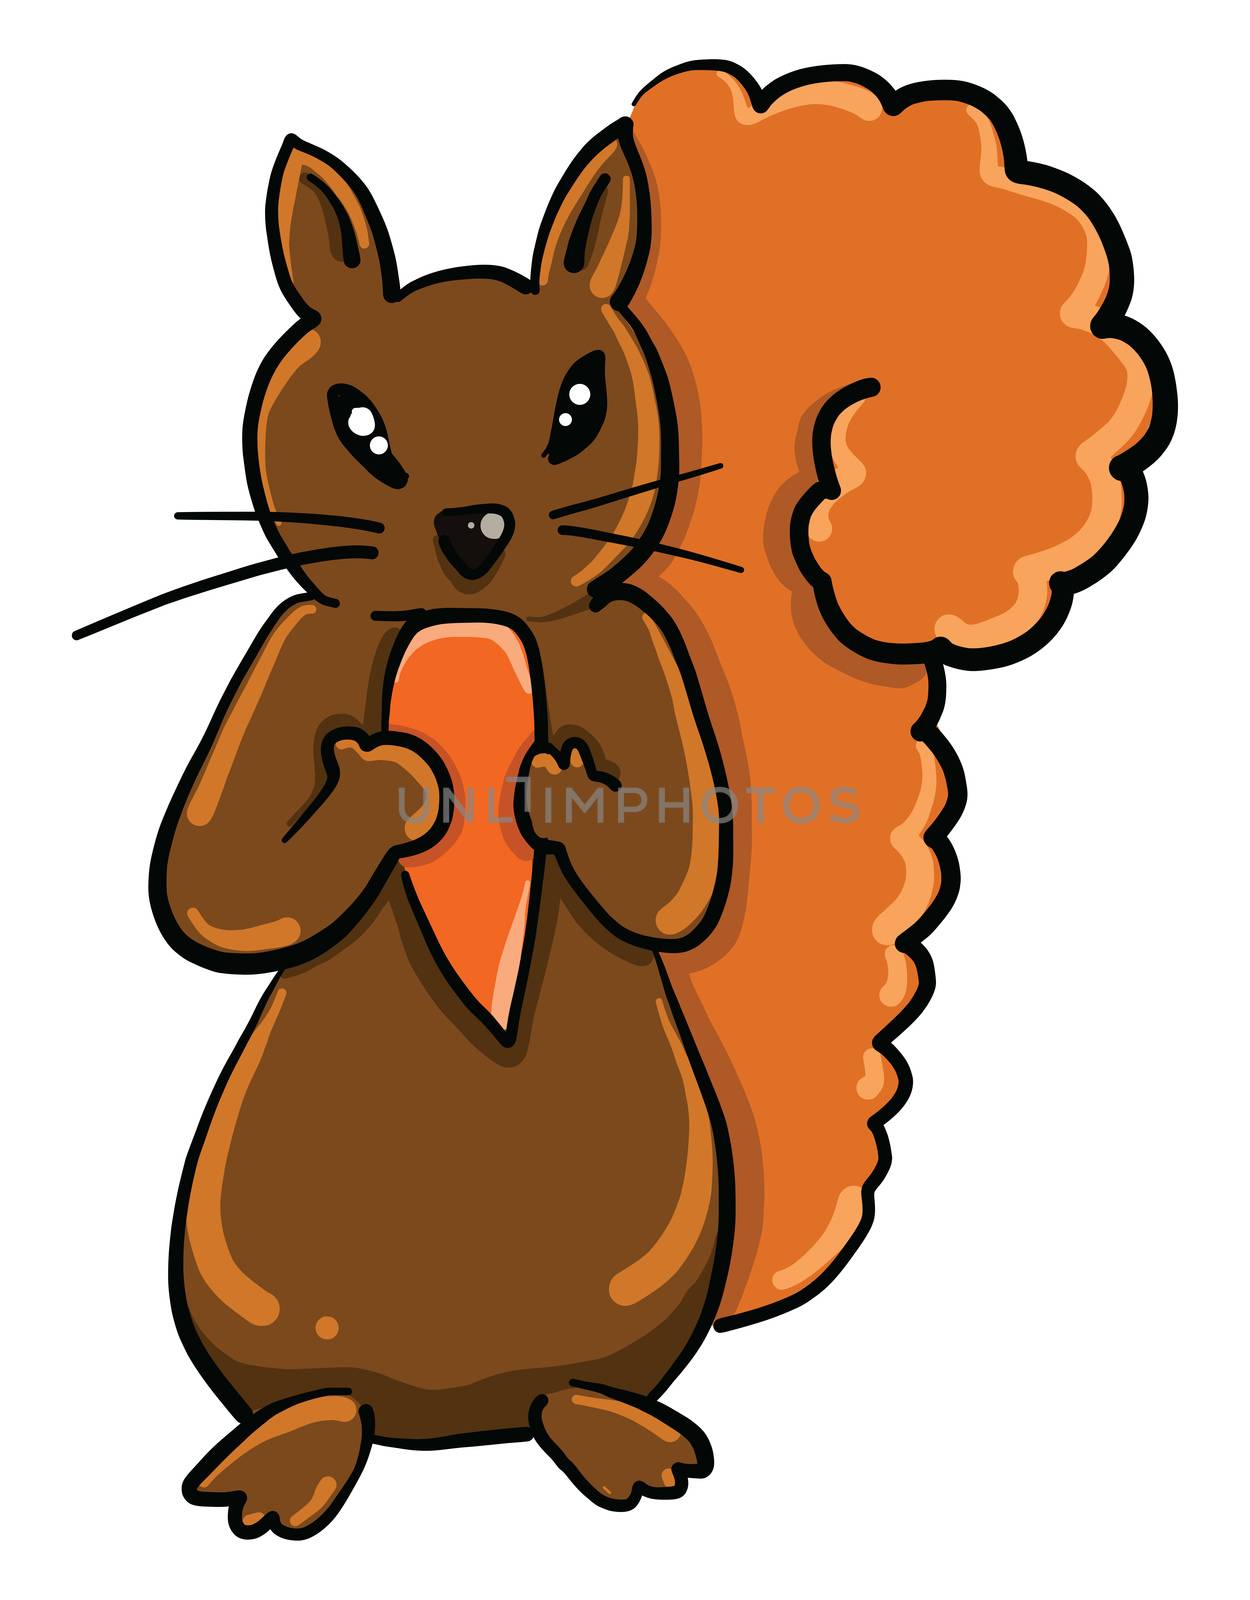 Squirrel with food , illustration, vector on white background